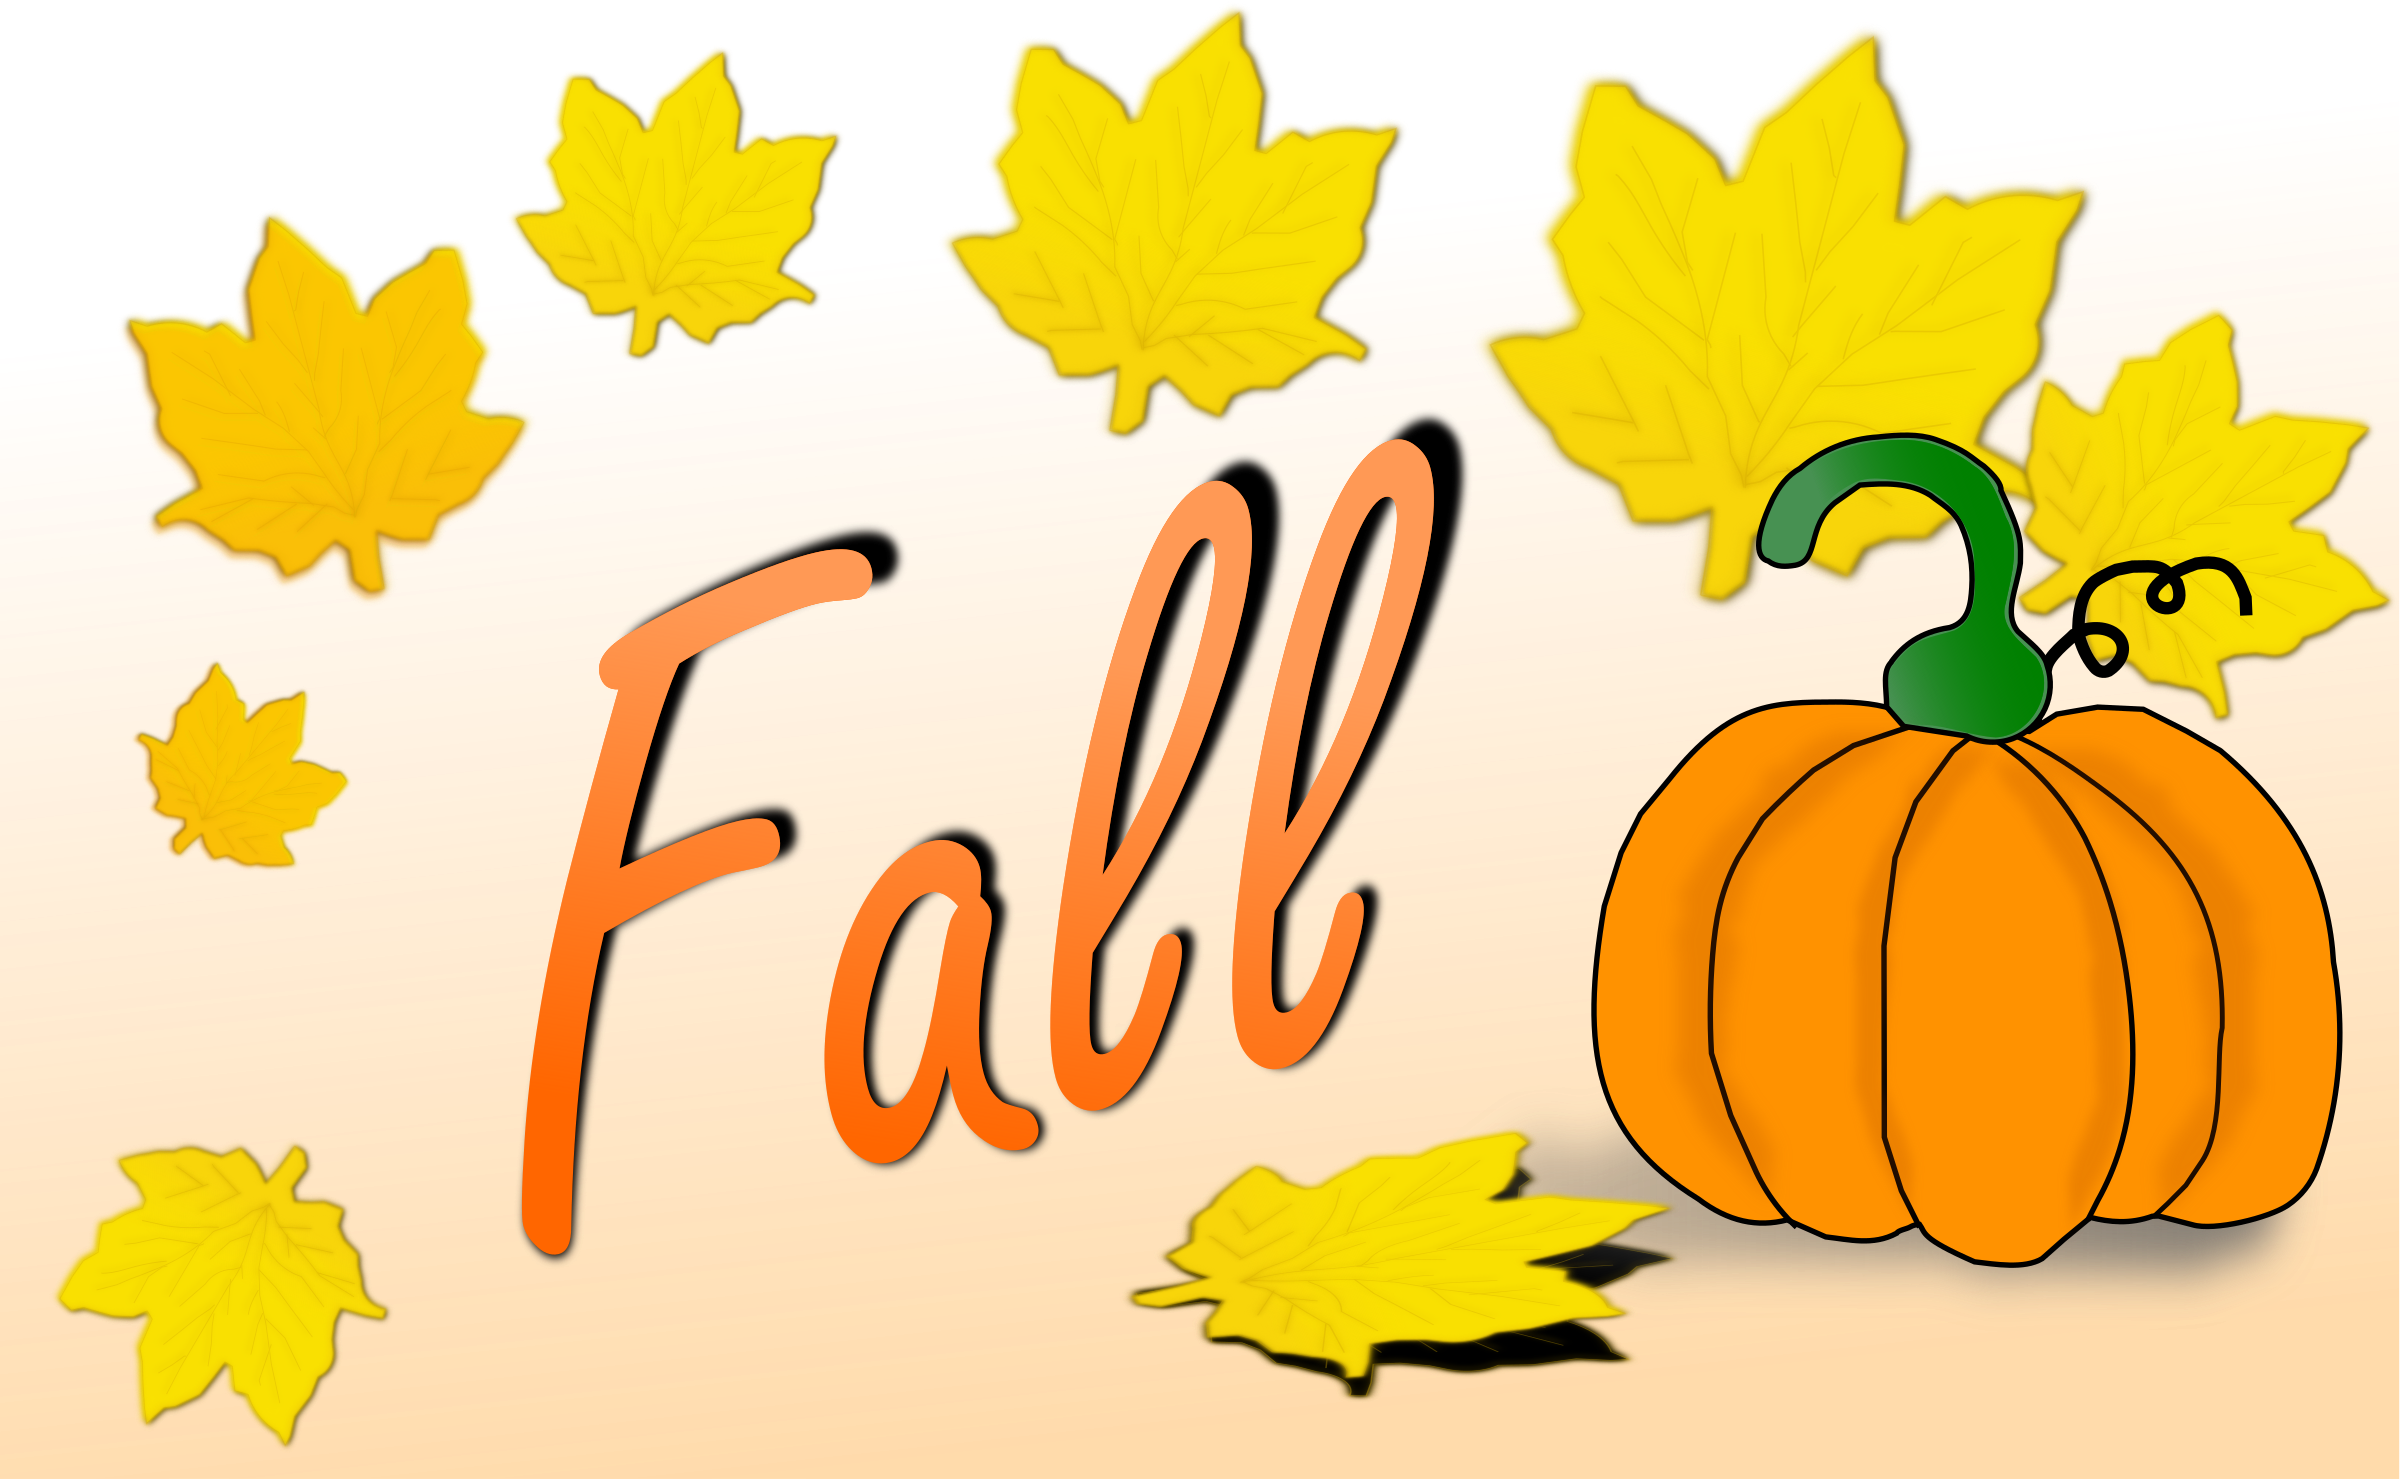 Clip Arts Related To - Fall Image Clip Art (2400x1479)